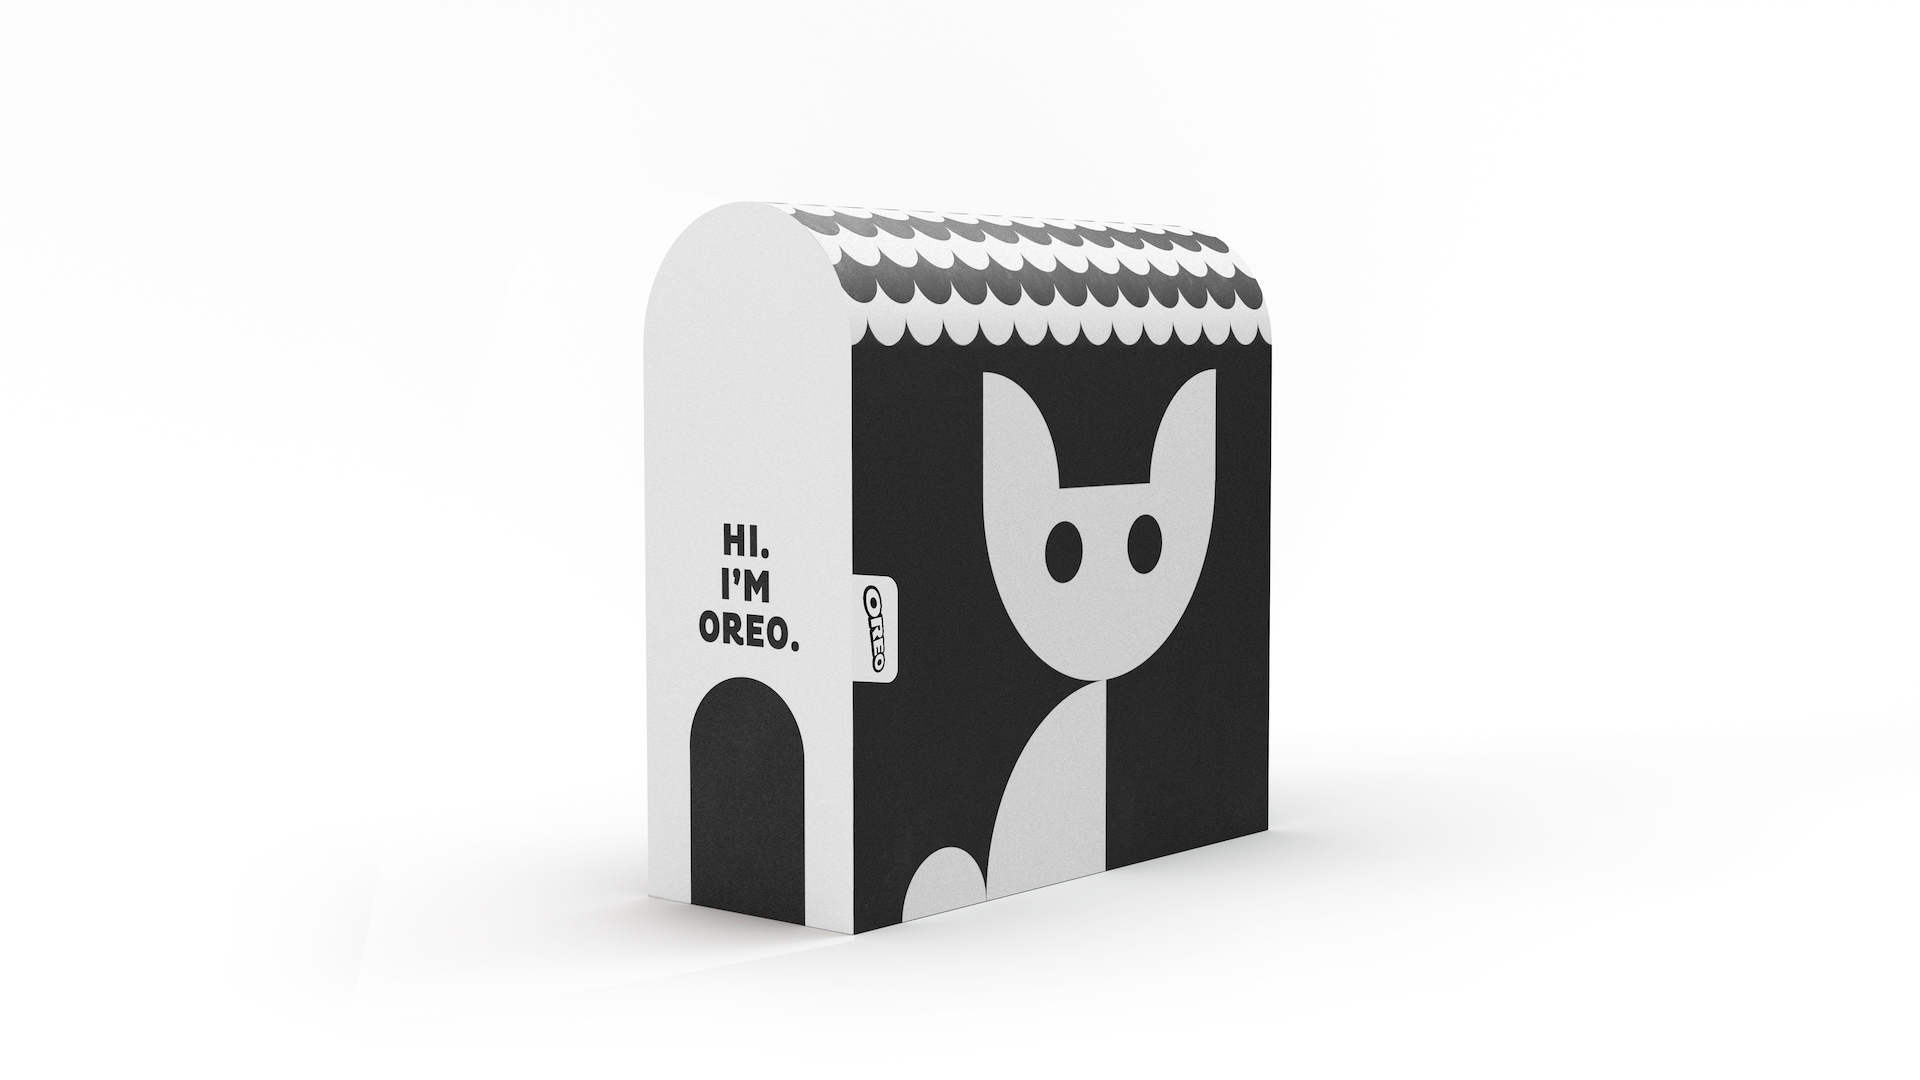 Oreo and Friends Packaging Design by Saatchi & Saatchi